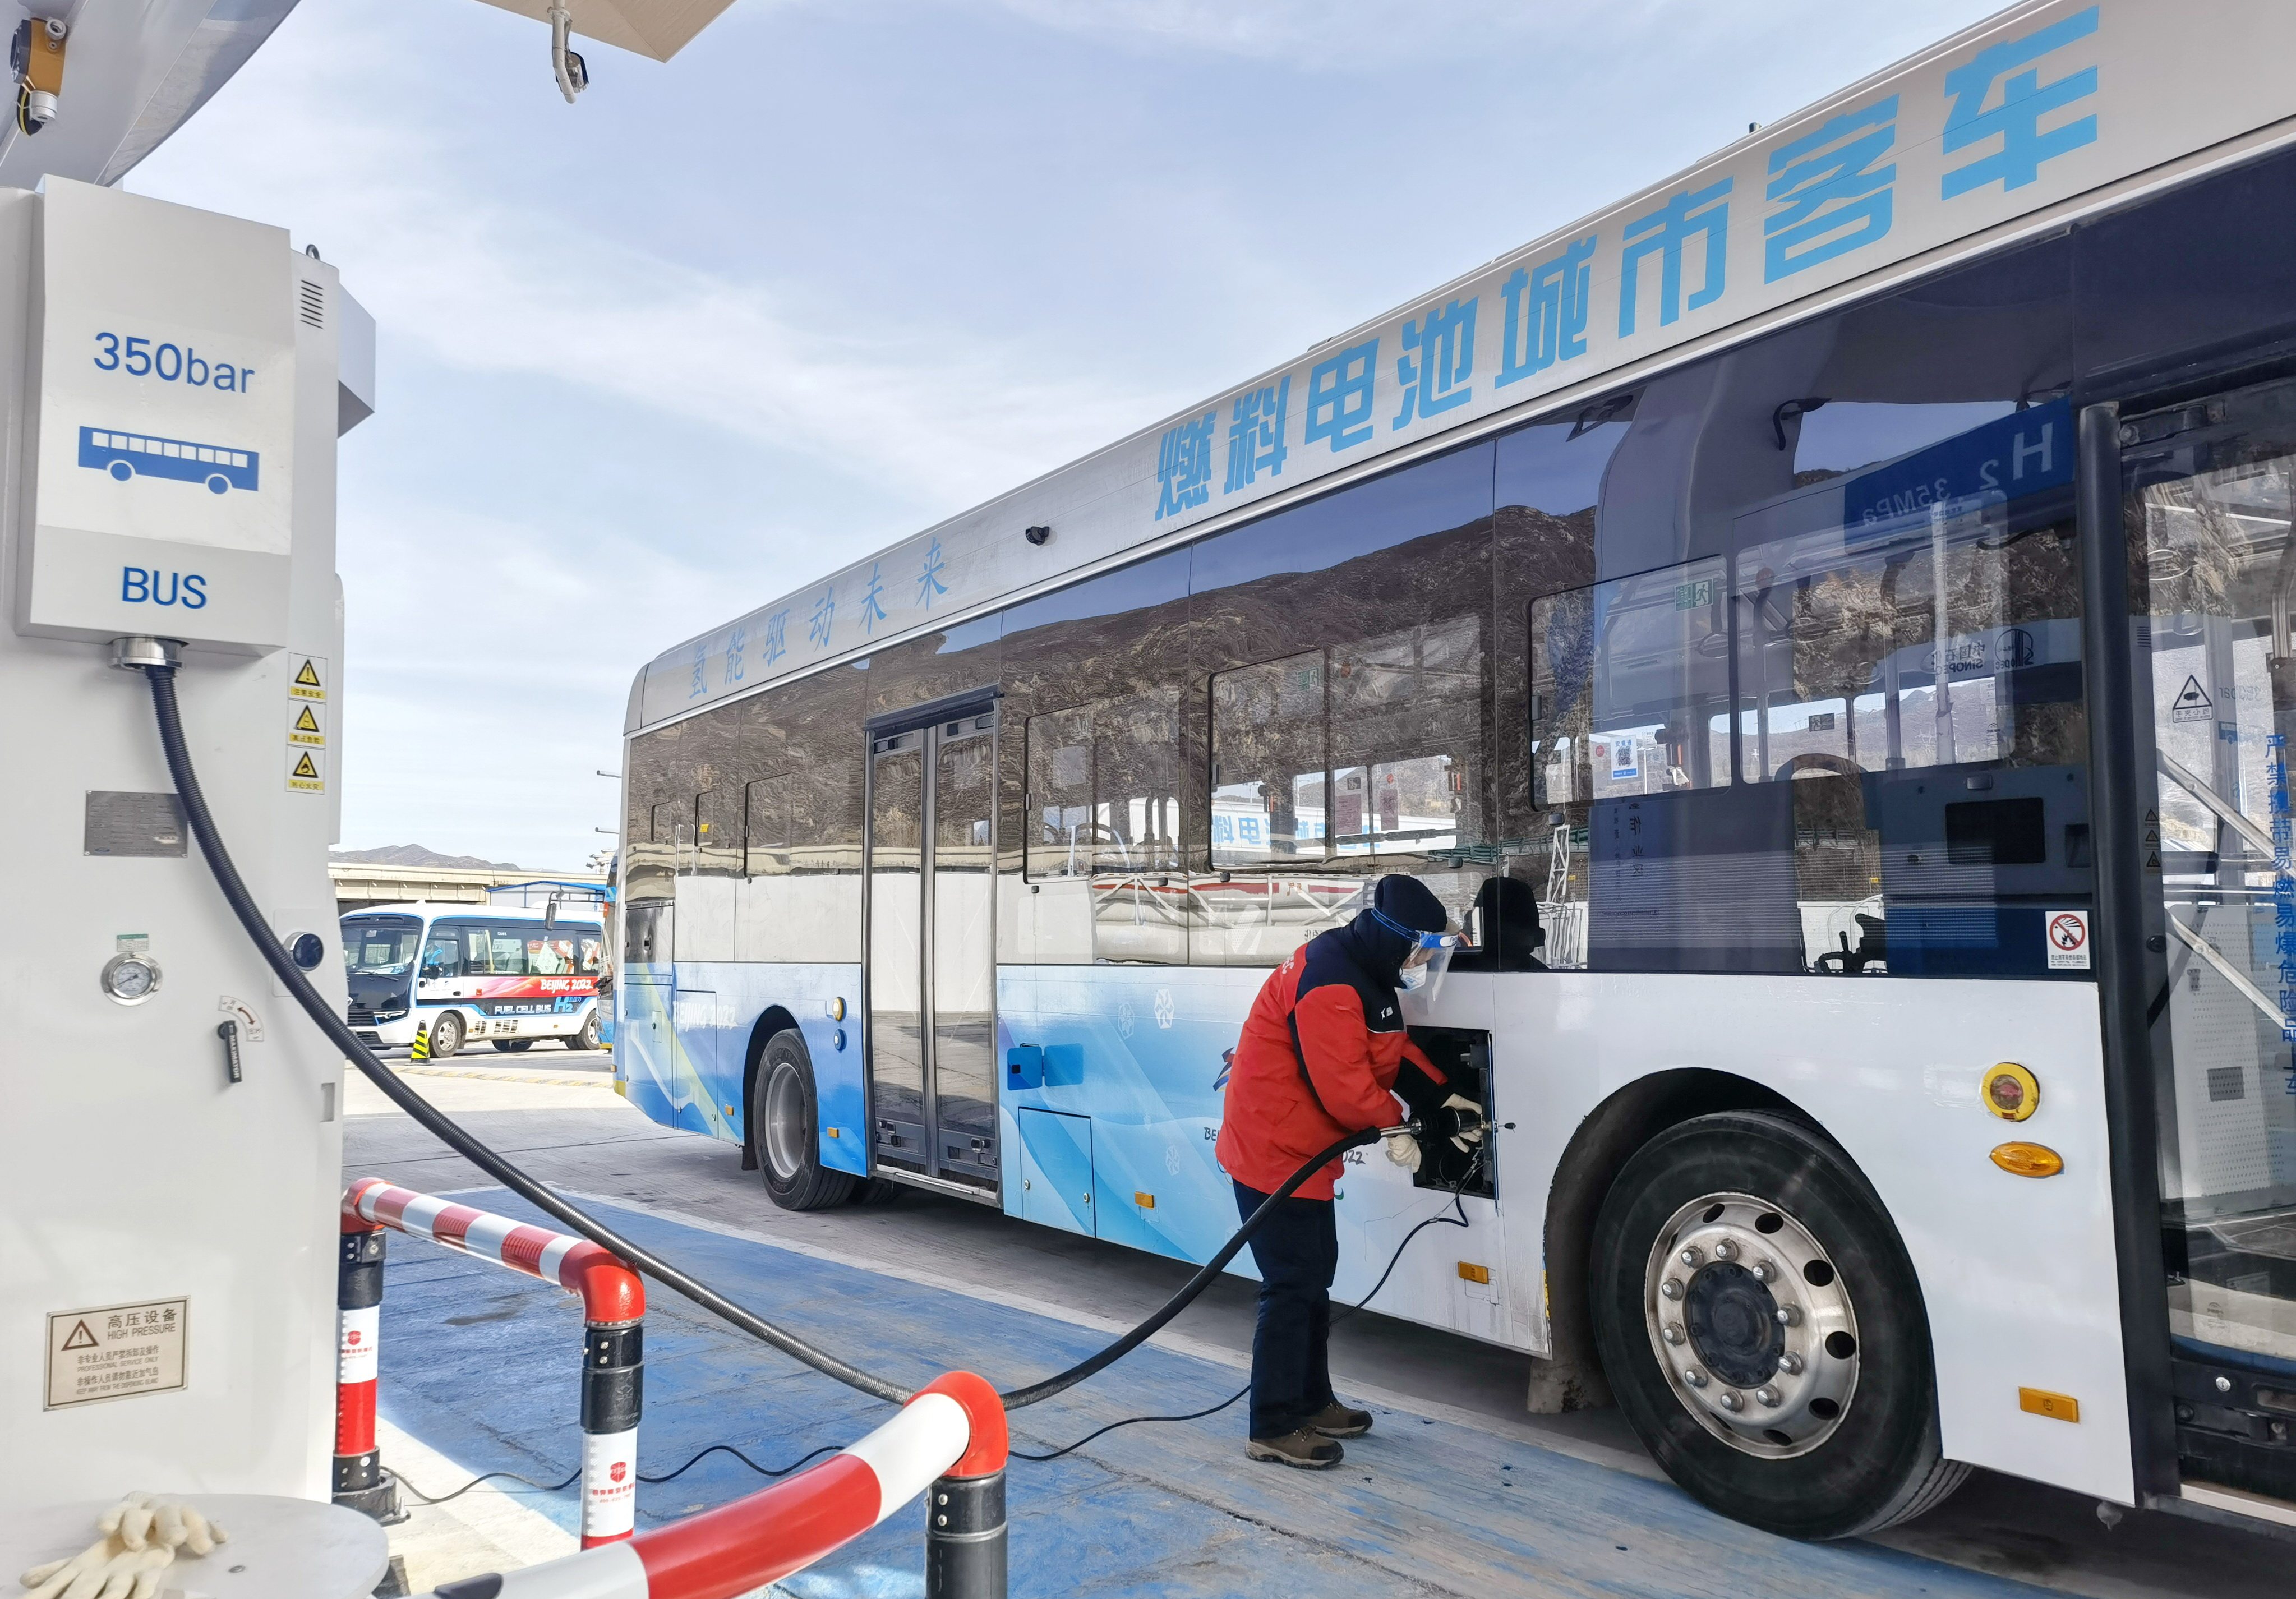 A staff member fills a hydrogen bus providing transport for the Beijing 2022 Winter Olympic Games at a Sinopec filling station in Zhangjiakou, in China’s northeastern Hebei province, on February 11, 2022. Photo: Getty Images